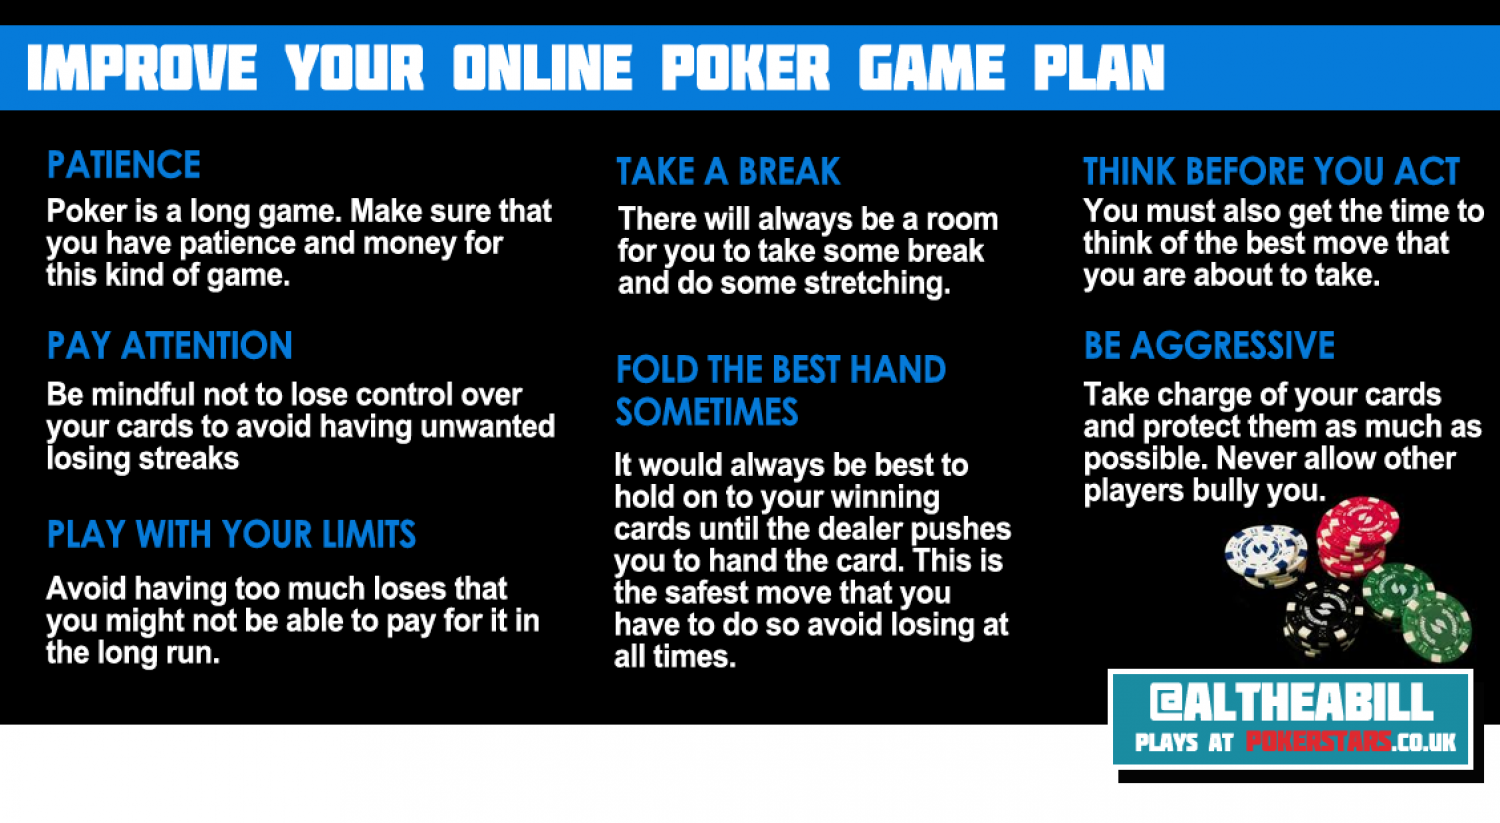 Improve your Online Poker Game Plan Infographic